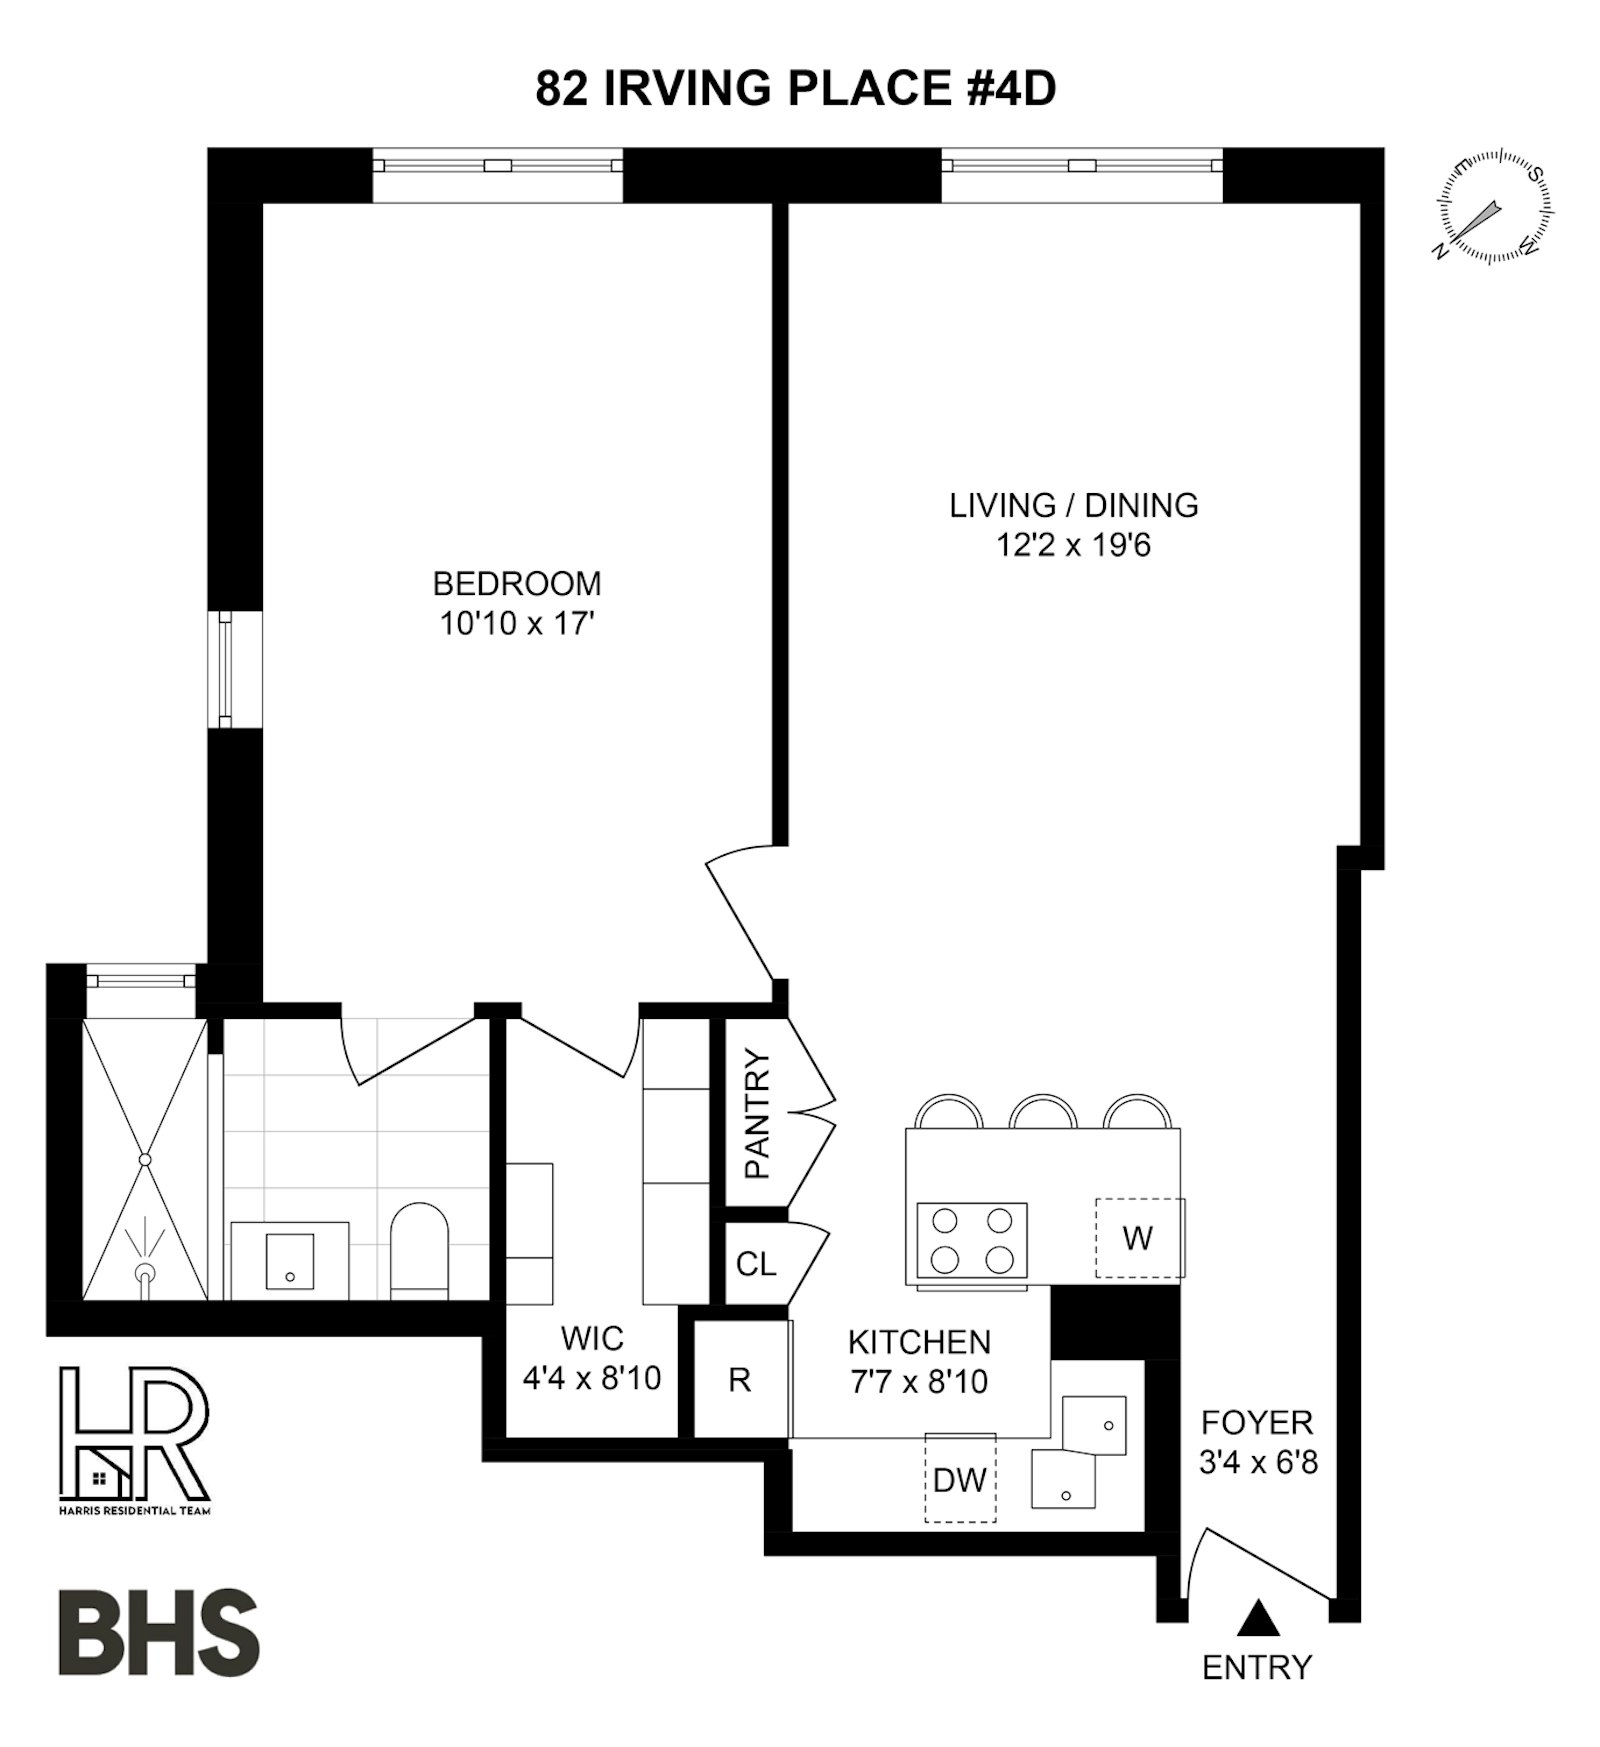 Floorplan for 82 Irving Place, 4D